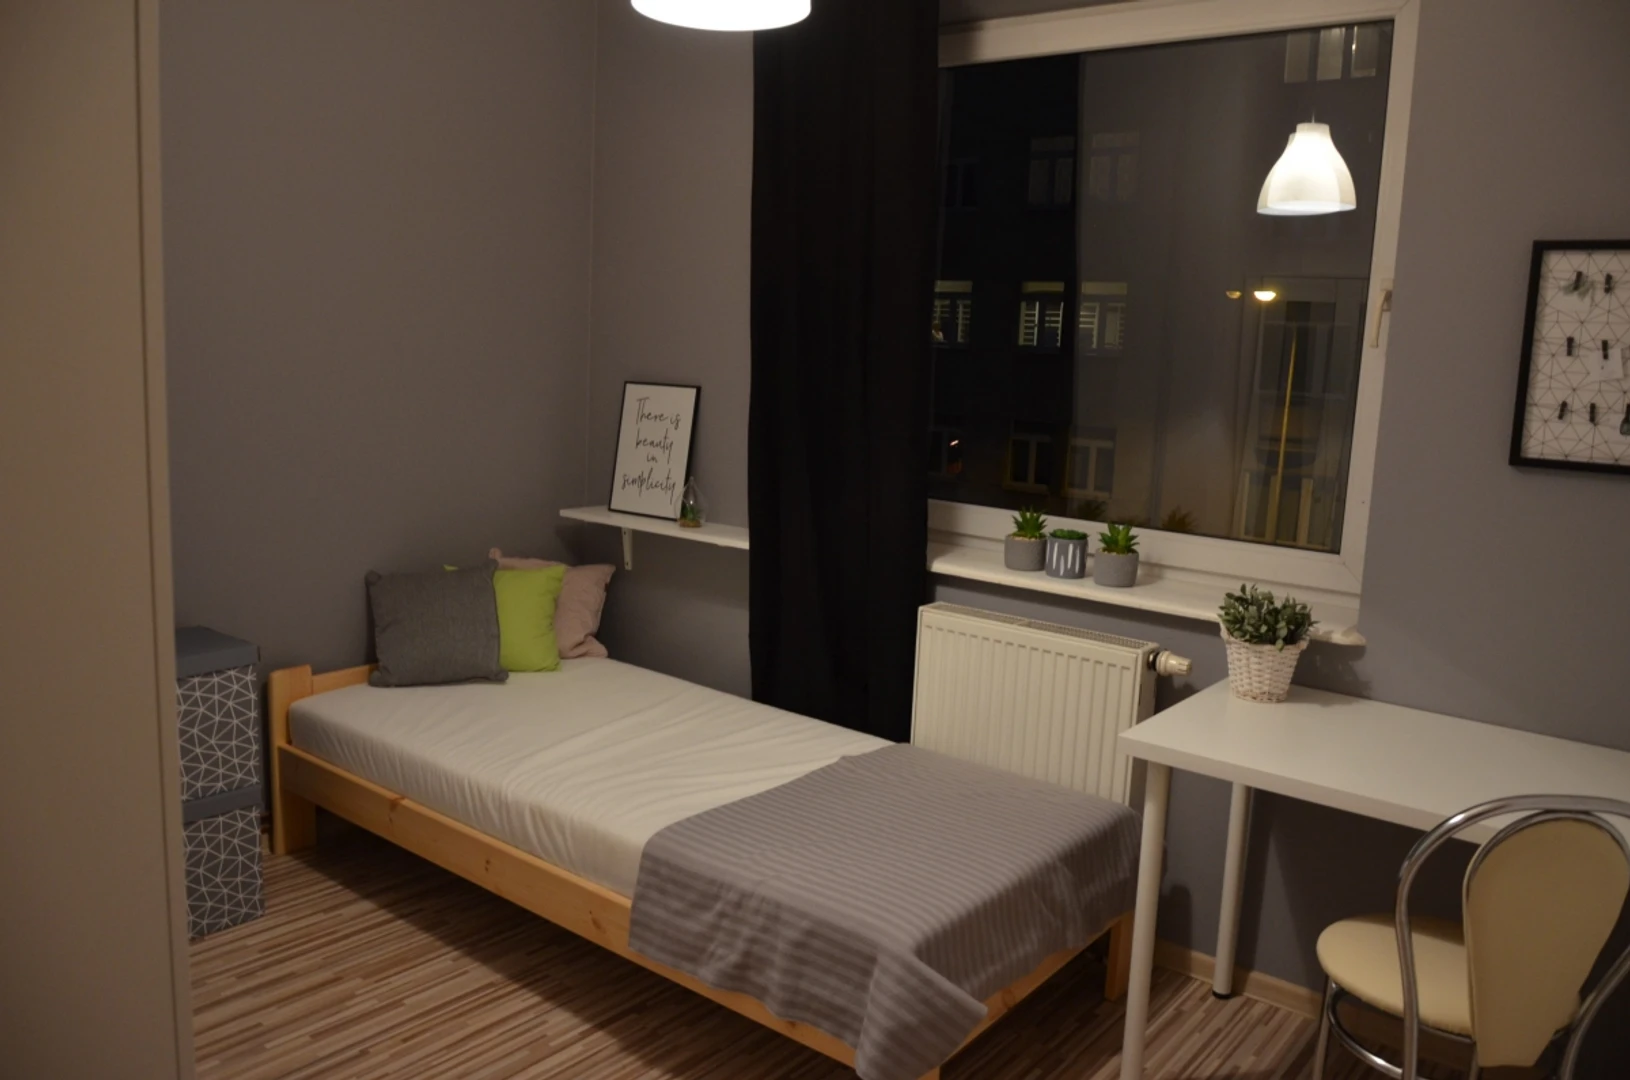 Room for rent with double bed Gdynia